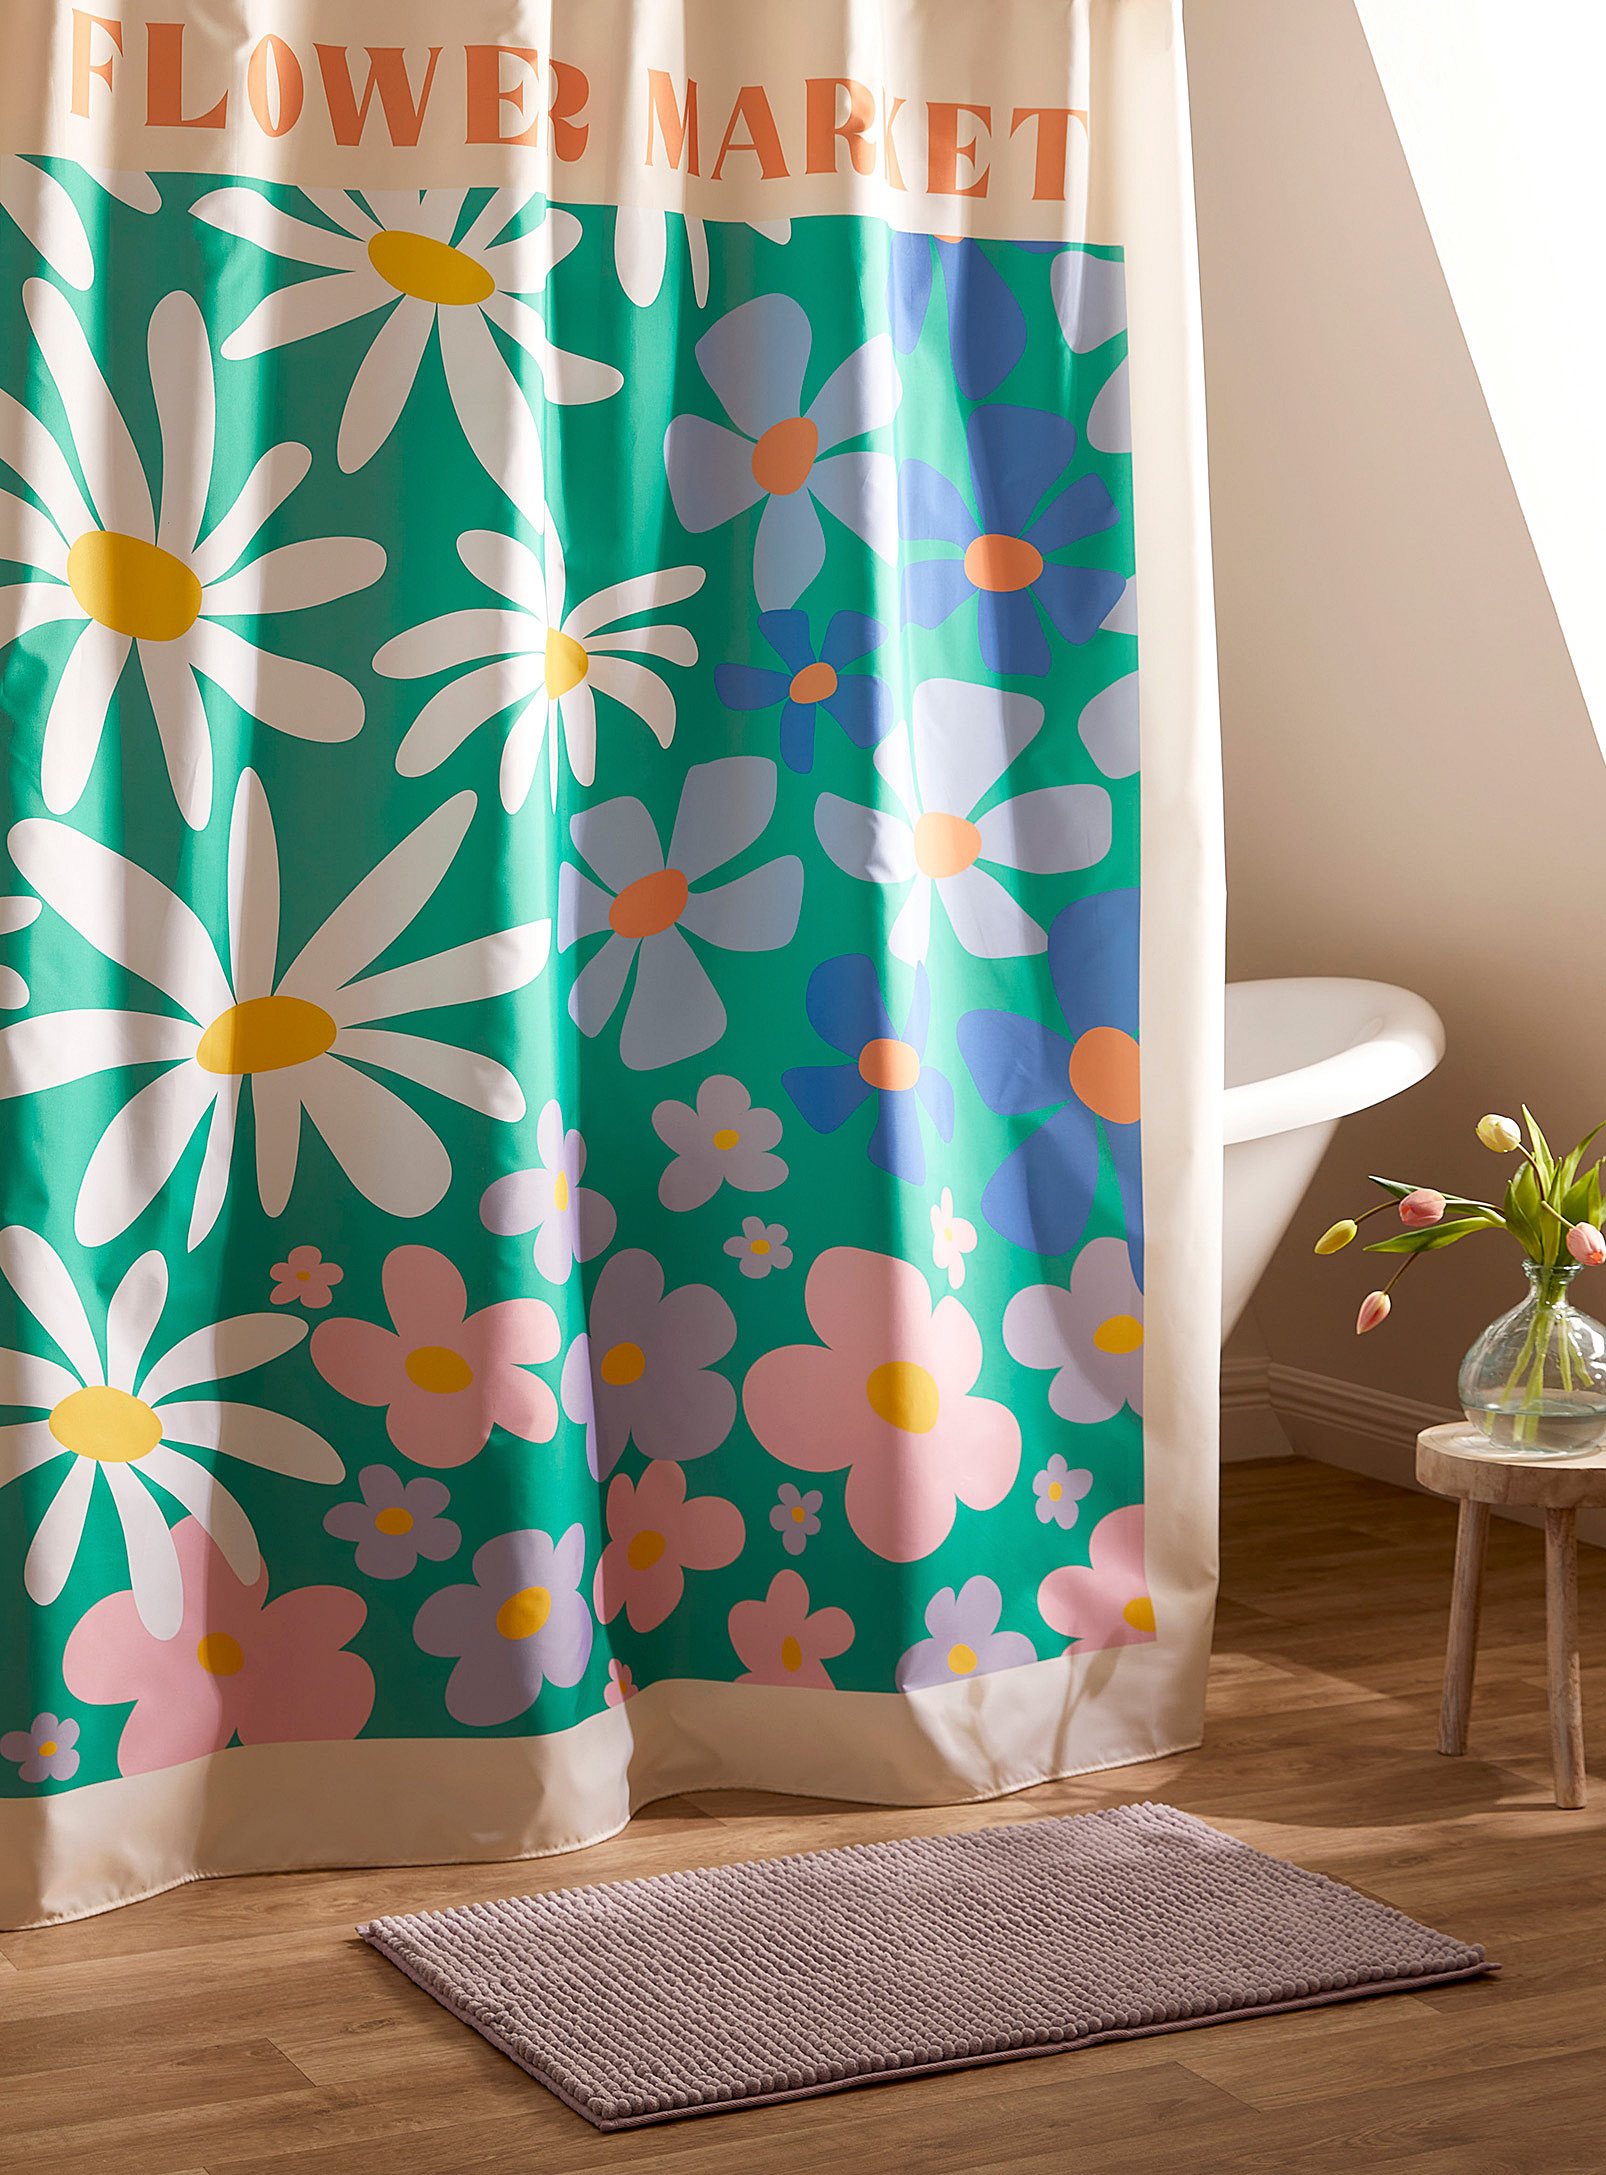 Simons Maison Flower Market Recycled Polyester Shower Curtain In Assorted